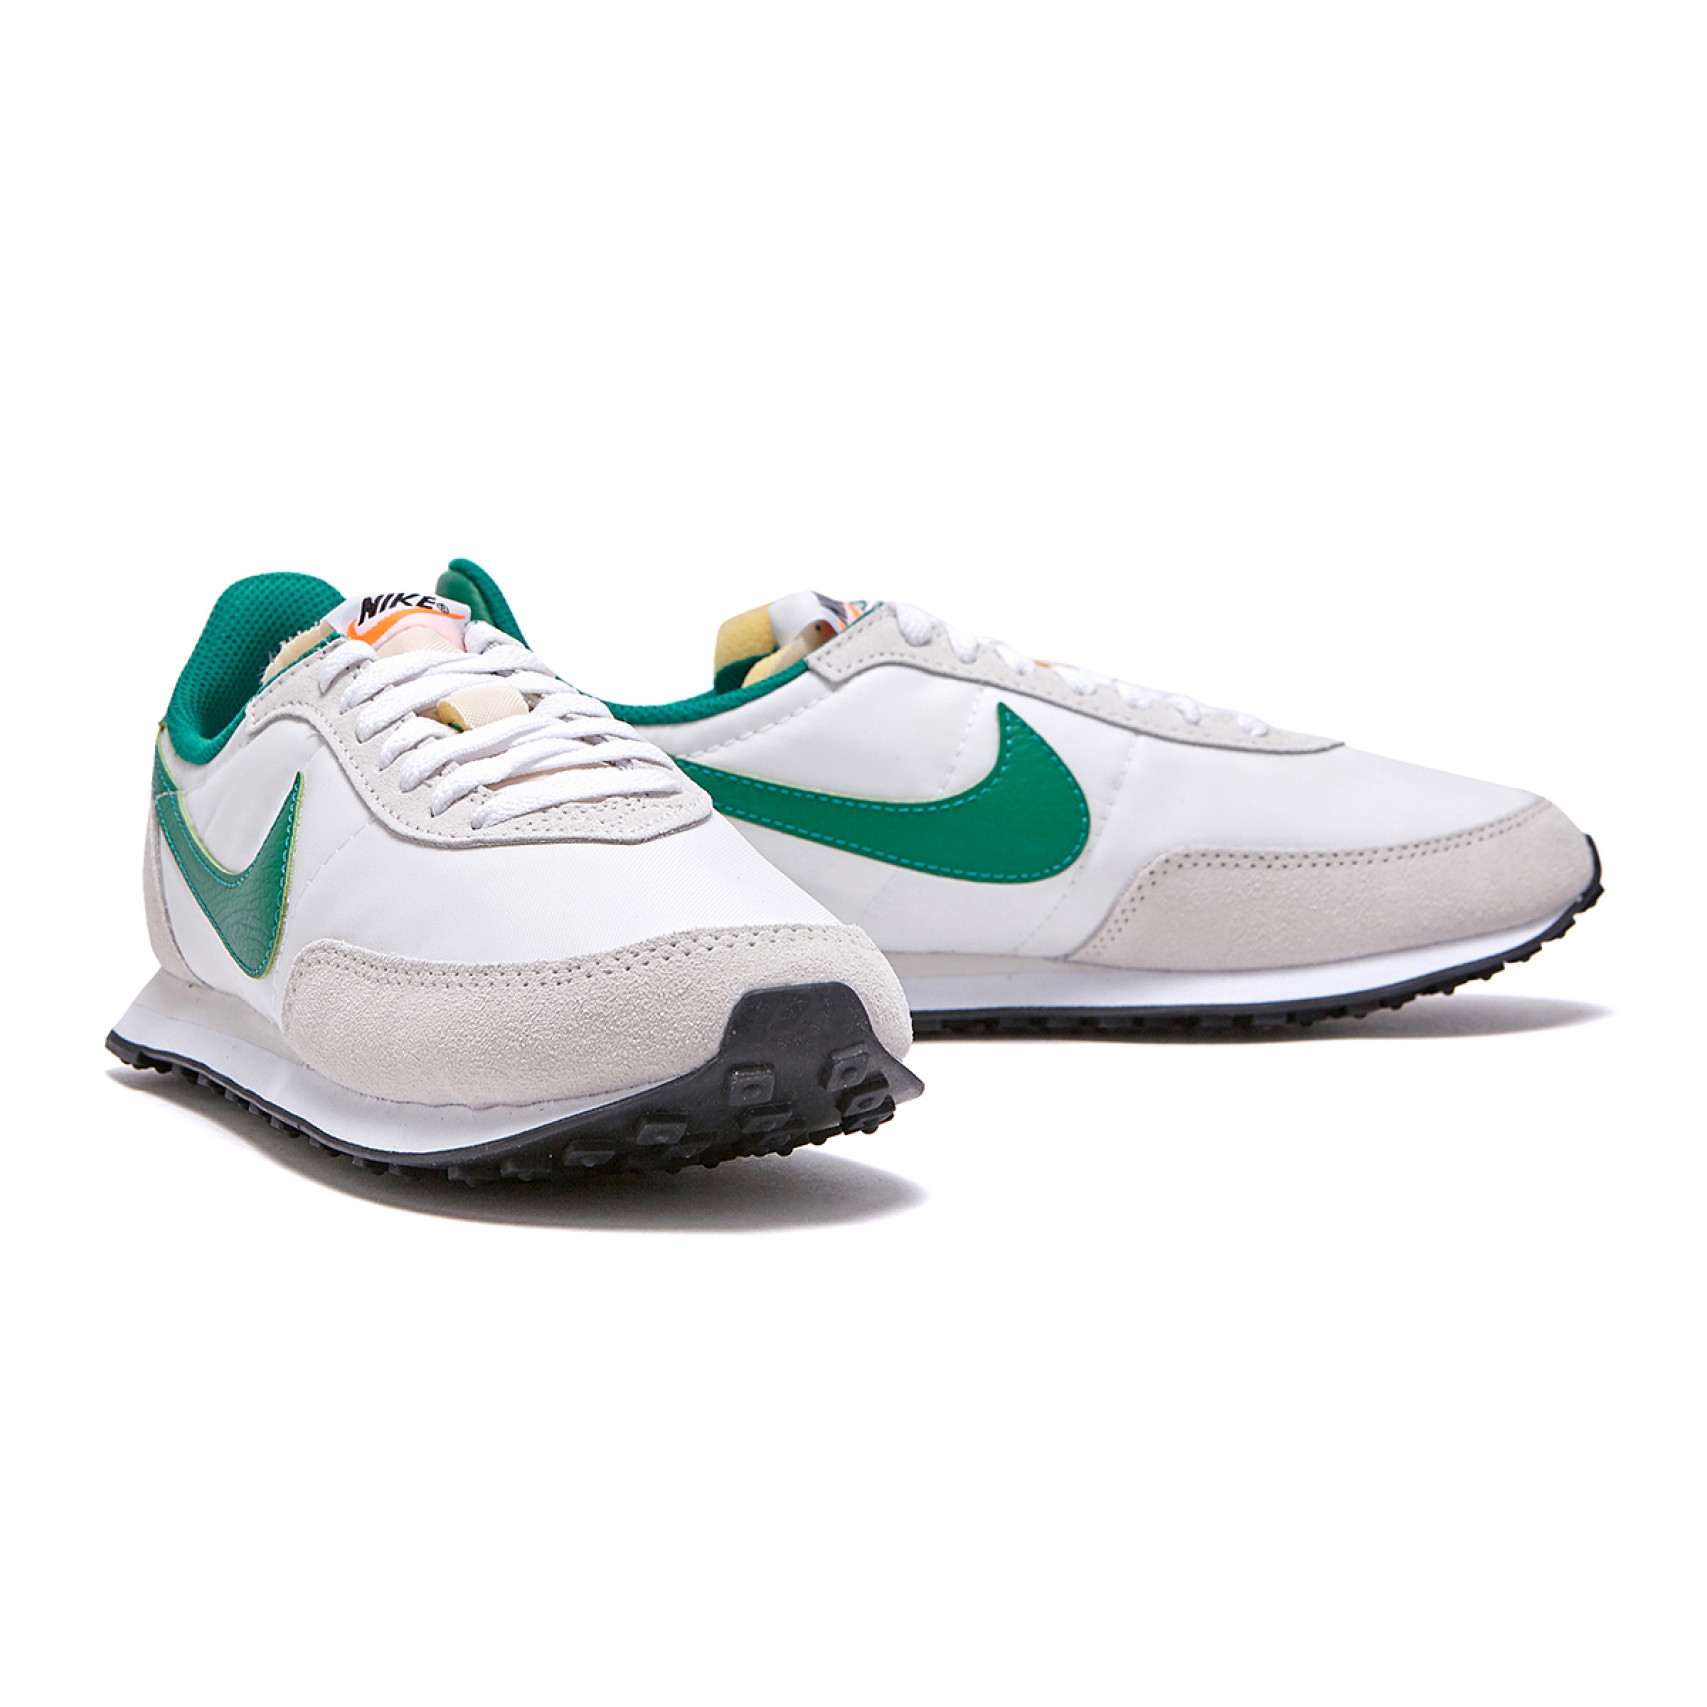 NIKE WAFFLE TRAINER 2 / DH1349-003